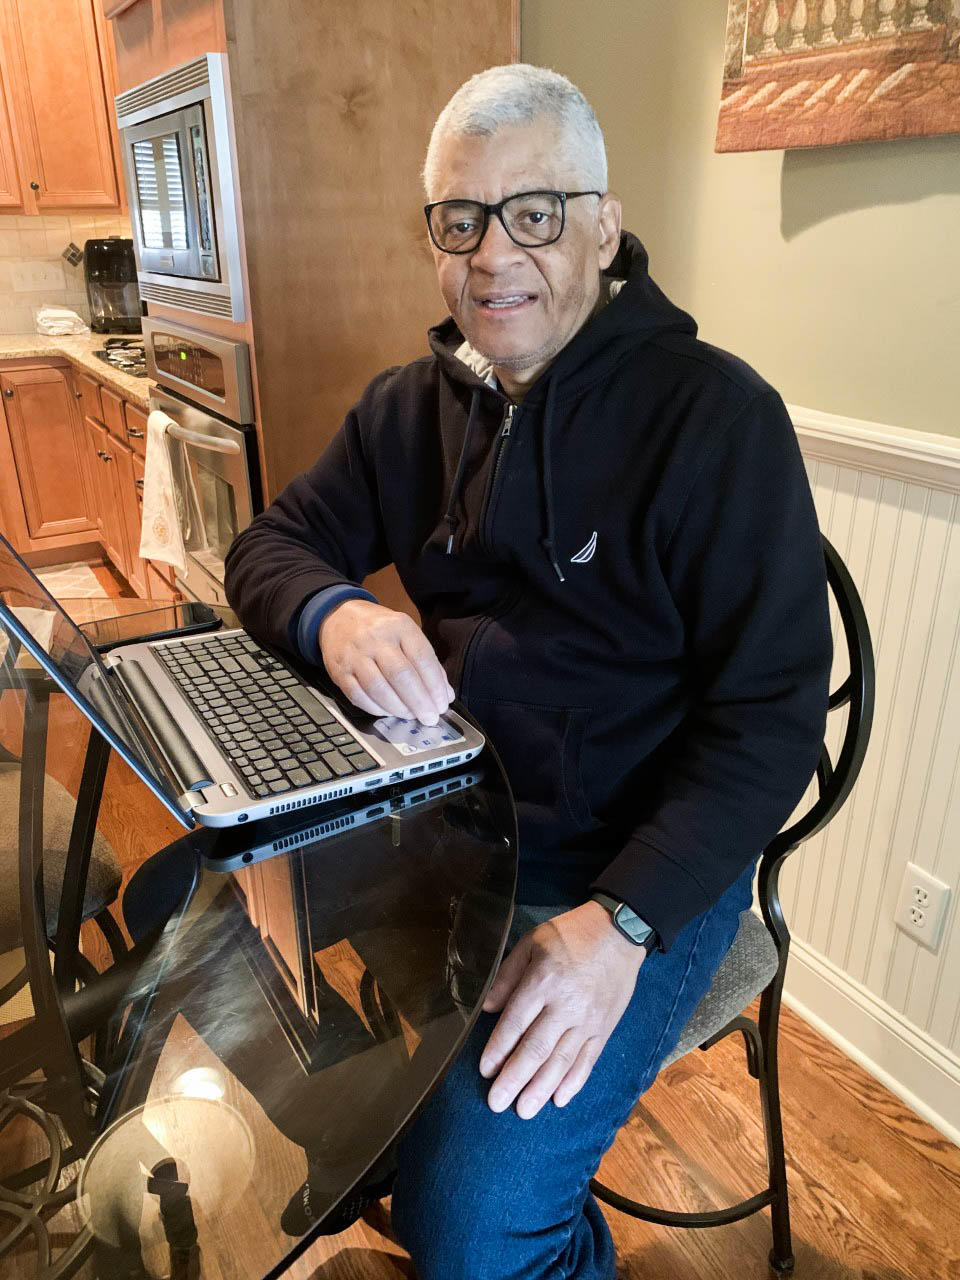 Larry Starling sitting at his kitchen table with his laptop computer.